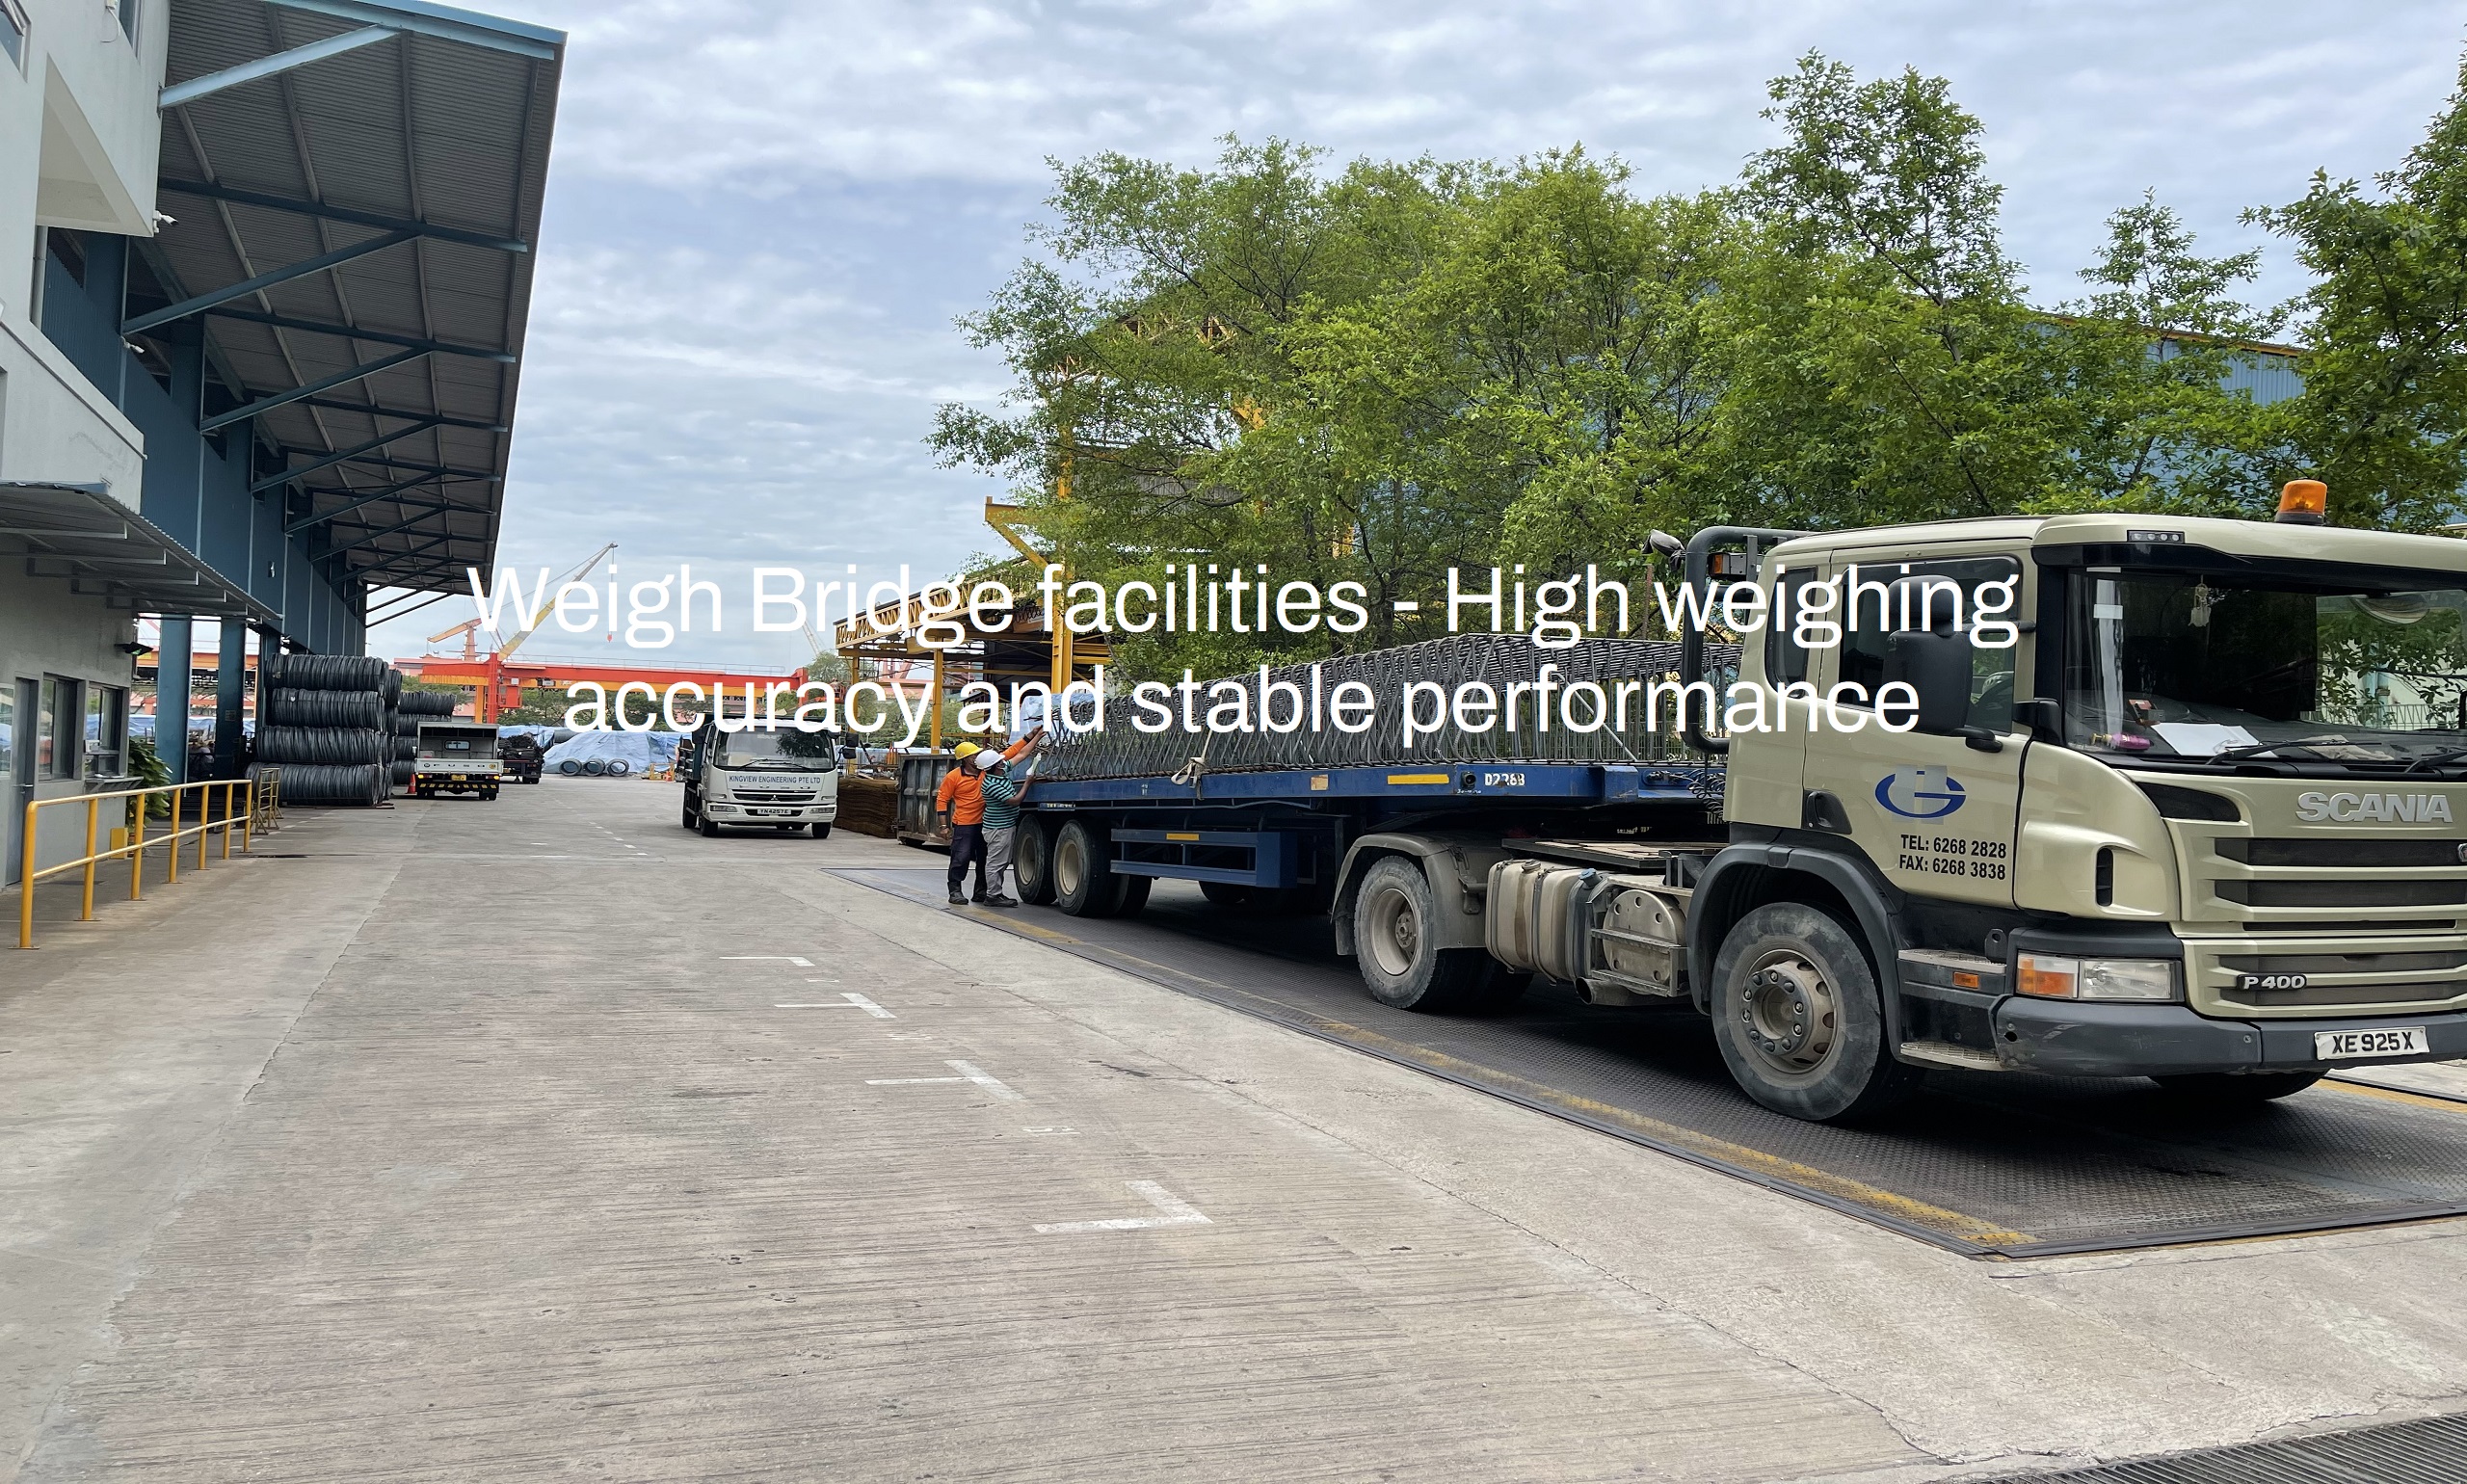 Weigh Bridge facilities - High weighing accuracy and stable performance